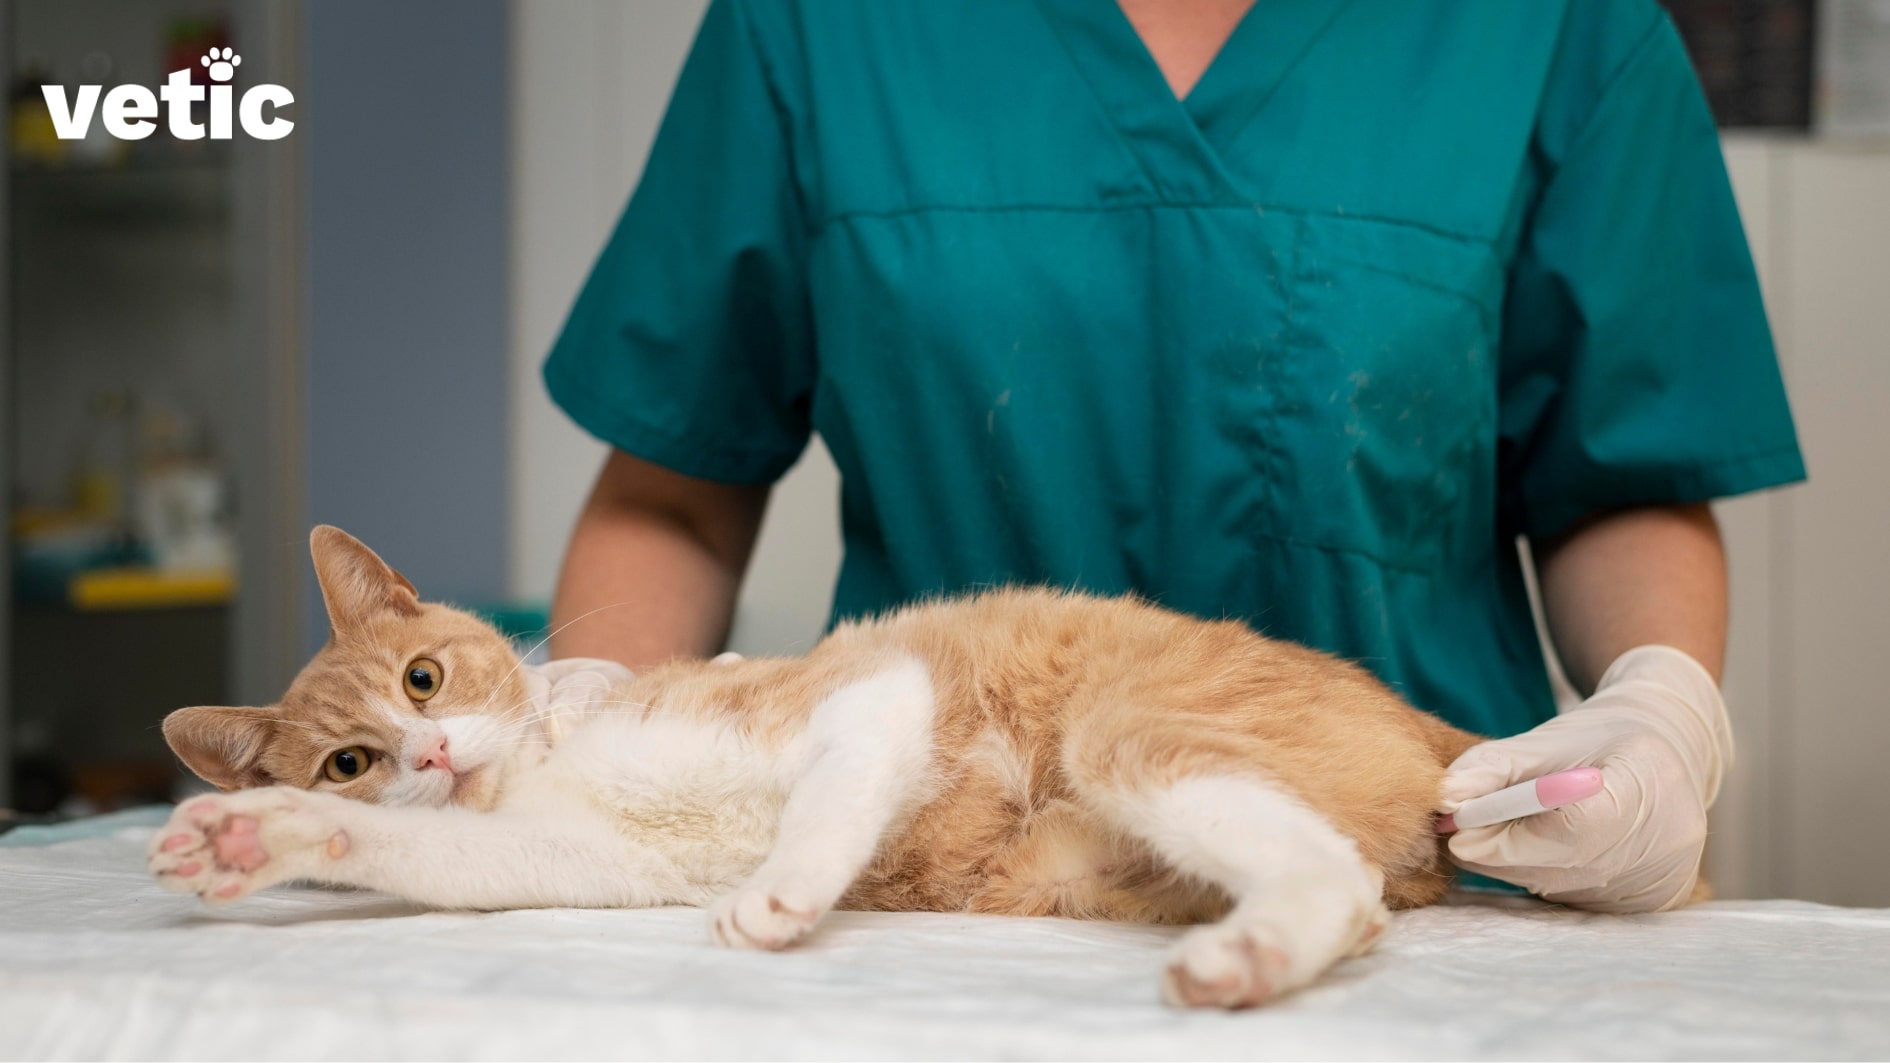 Regular veterinary check-up for cats. Person in scrubs and gloved hands taking the temperature of an orange and white cat lying sideways.